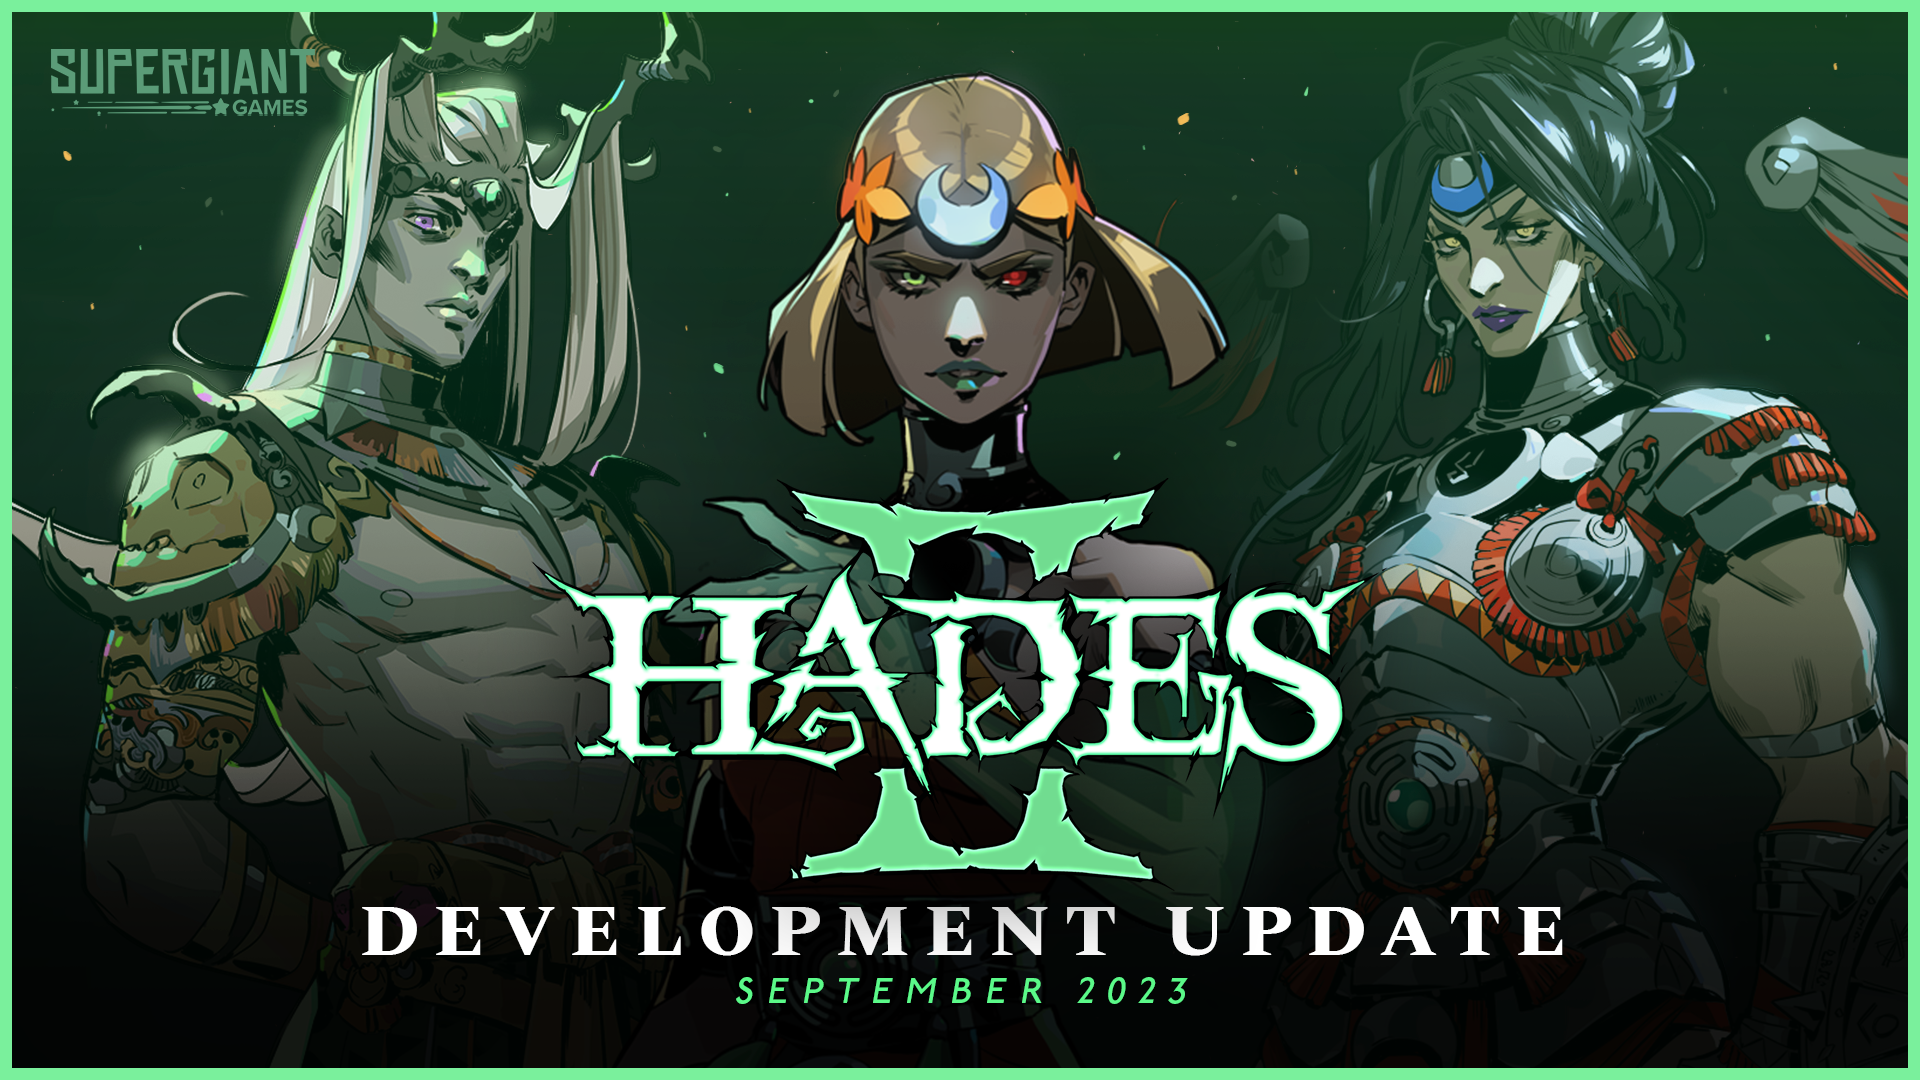 Hades 2 release date  When does Hades 2 come out?